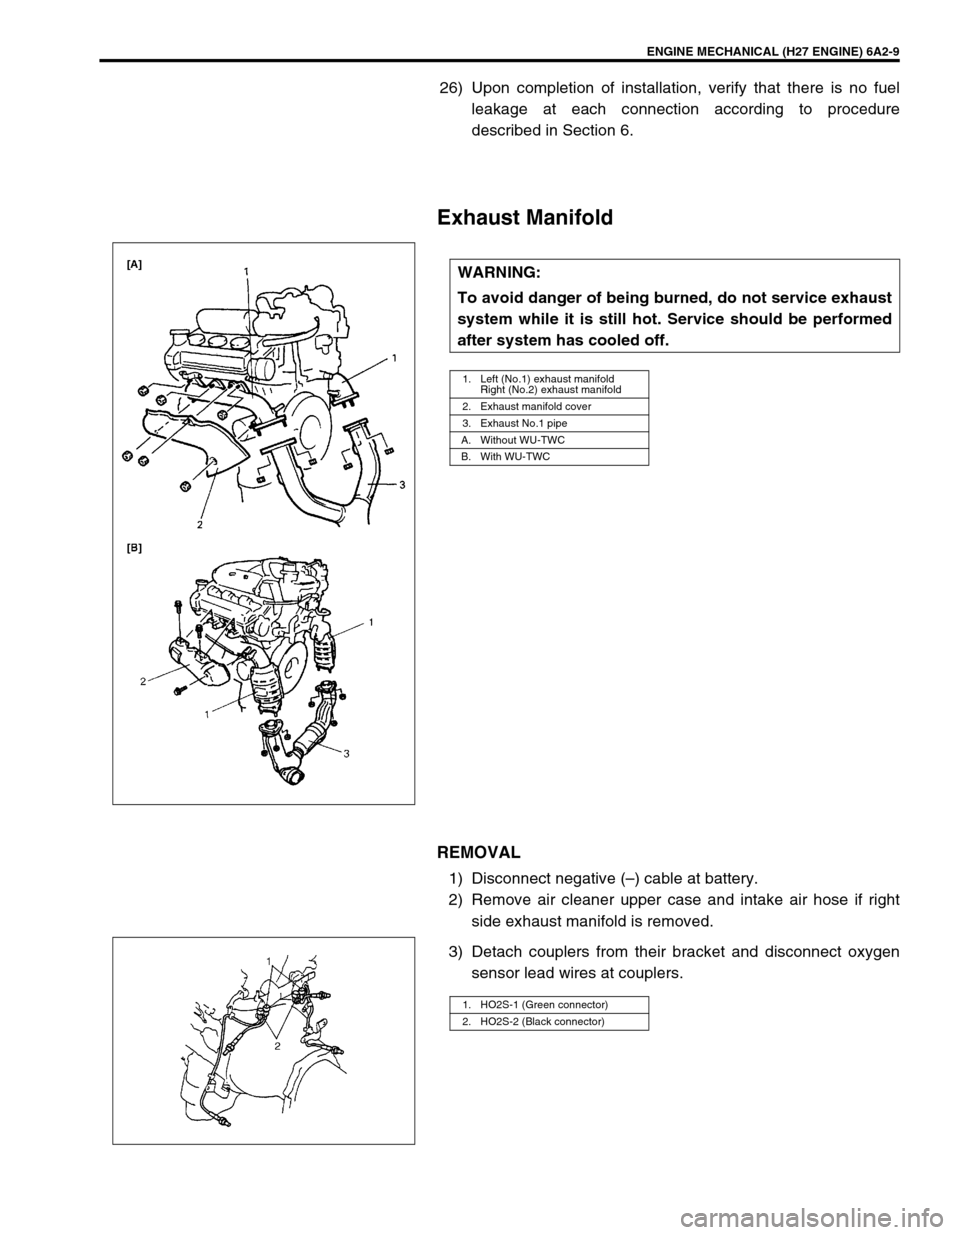 SUZUKI GRAND VITARA 2001 2.G Service Manual ENGINE MECHANICAL (H27 ENGINE) 6A2-9
26) Upon completion of installation, verify that there is no fuel
leakage at each connection according to procedure
described in Section 6.
Exhaust Manifold
REMOVA